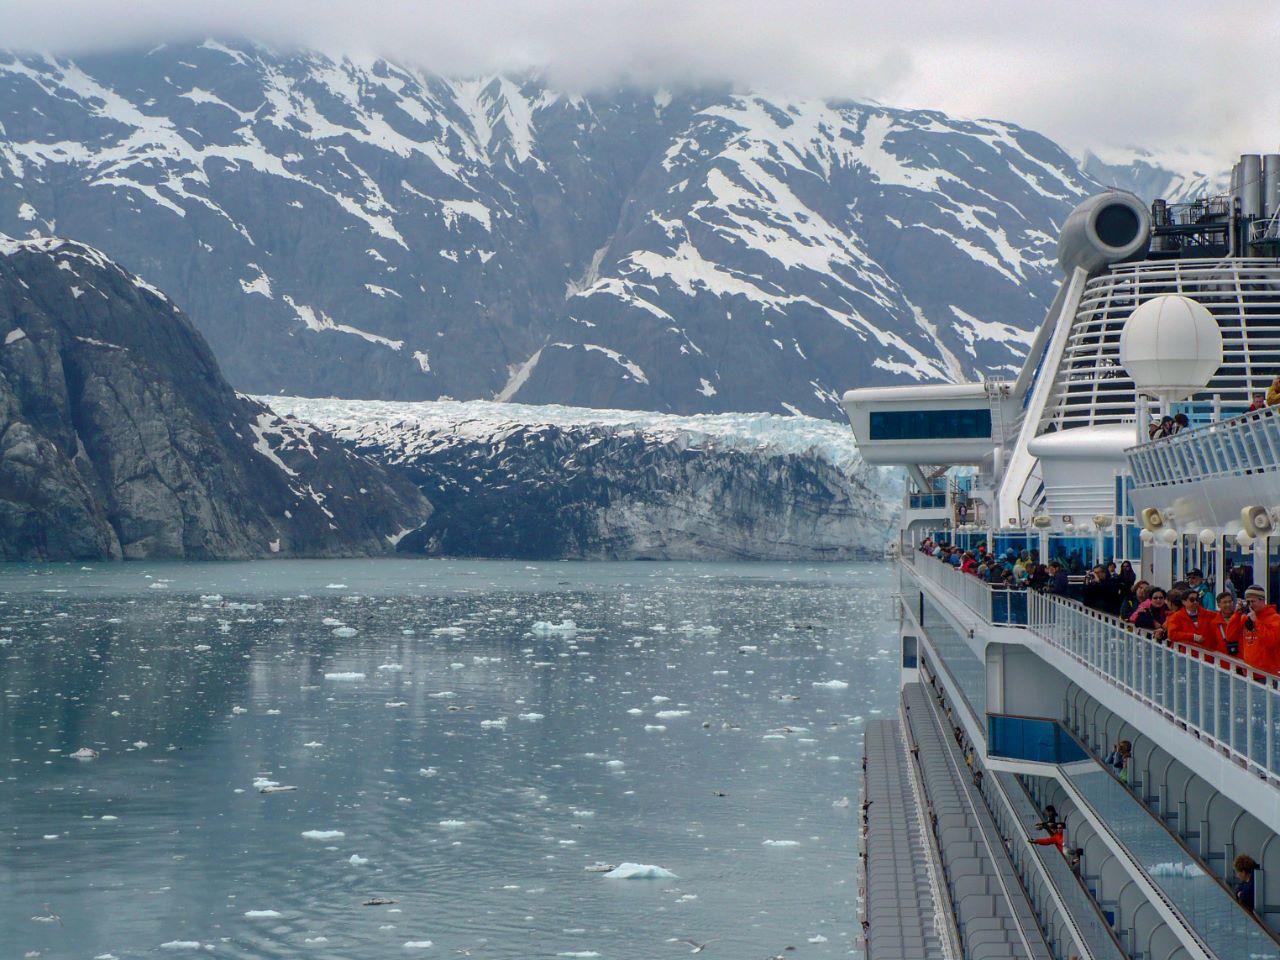 Approaching the Margerie Glacier